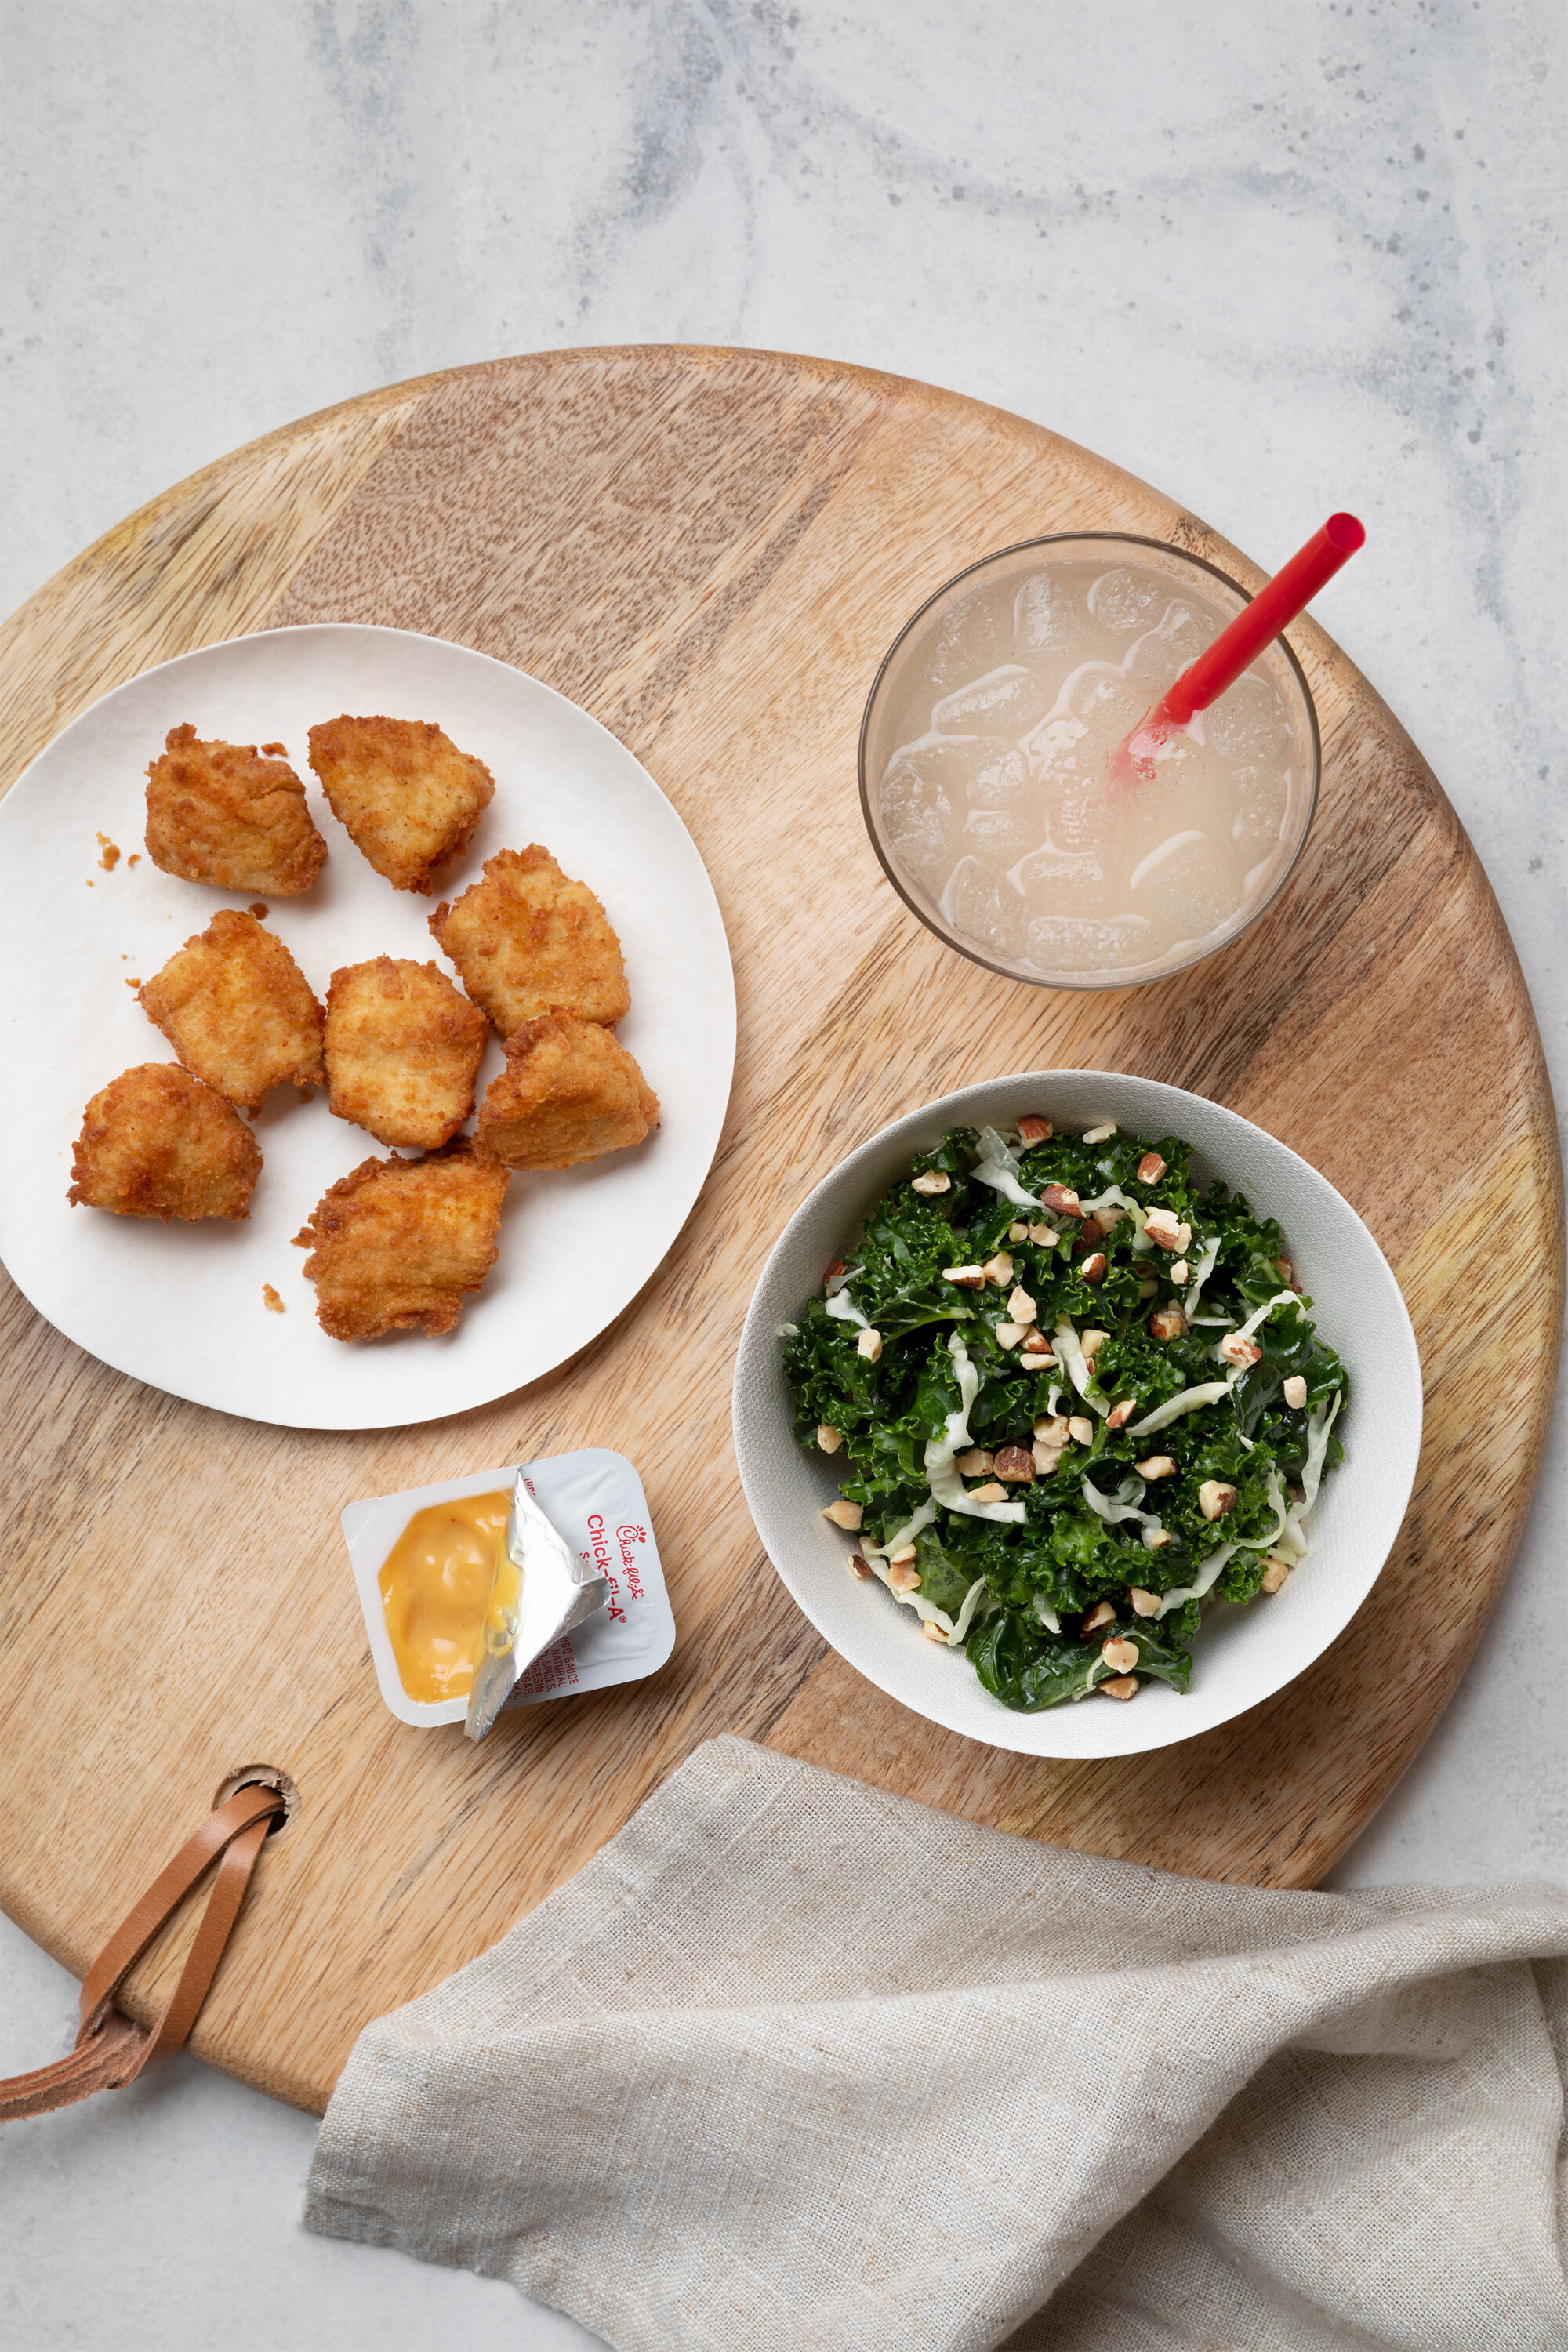 Top Food Photographer Kathryn McCrary Chick fil A kale.jpg